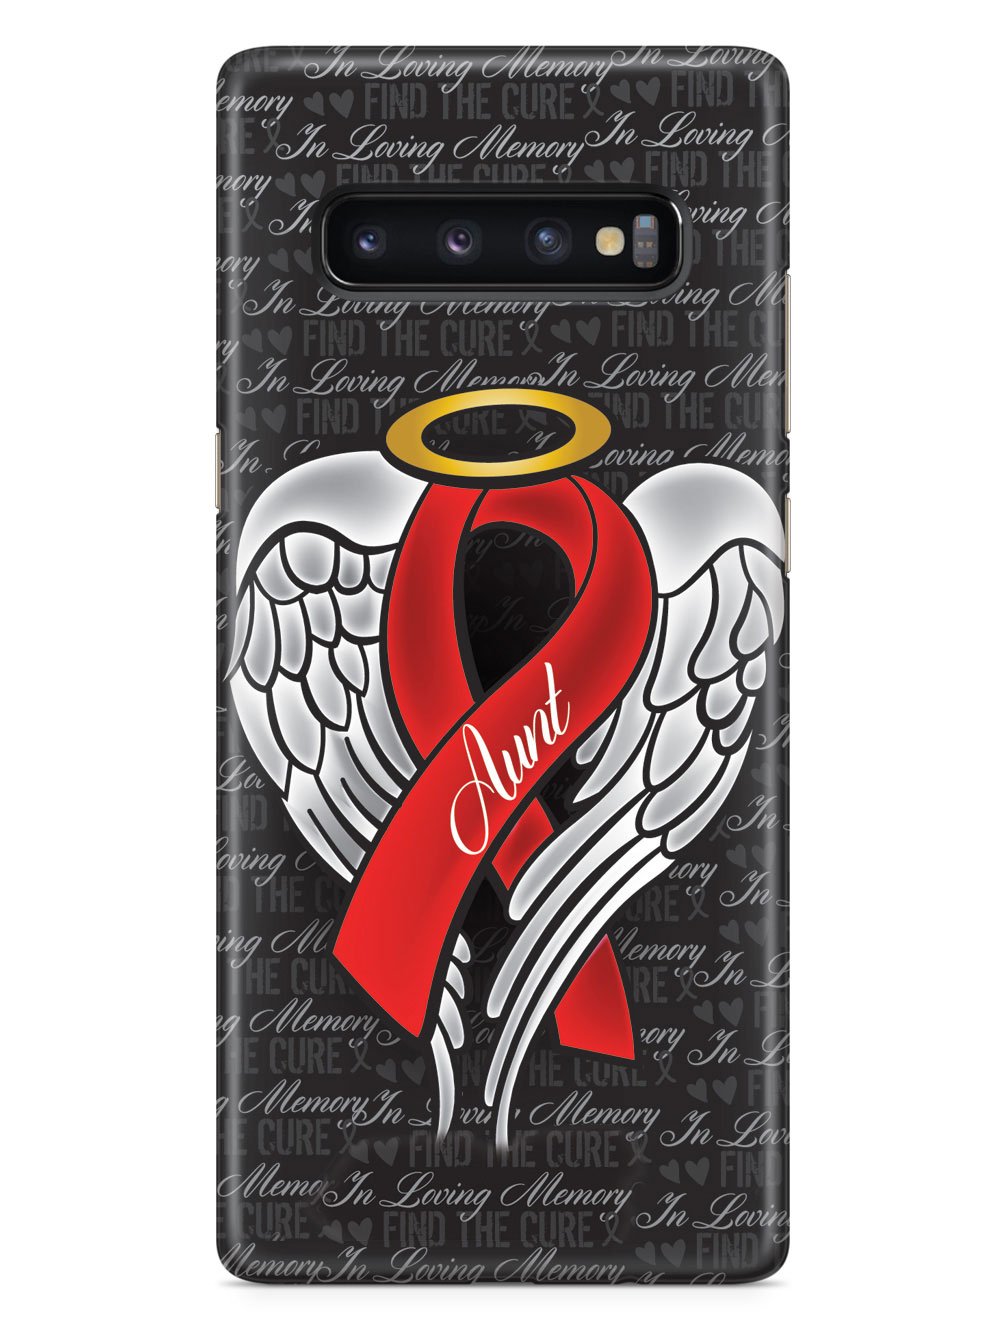 In Loving Memory of My Aunt - Red Ribbon Case